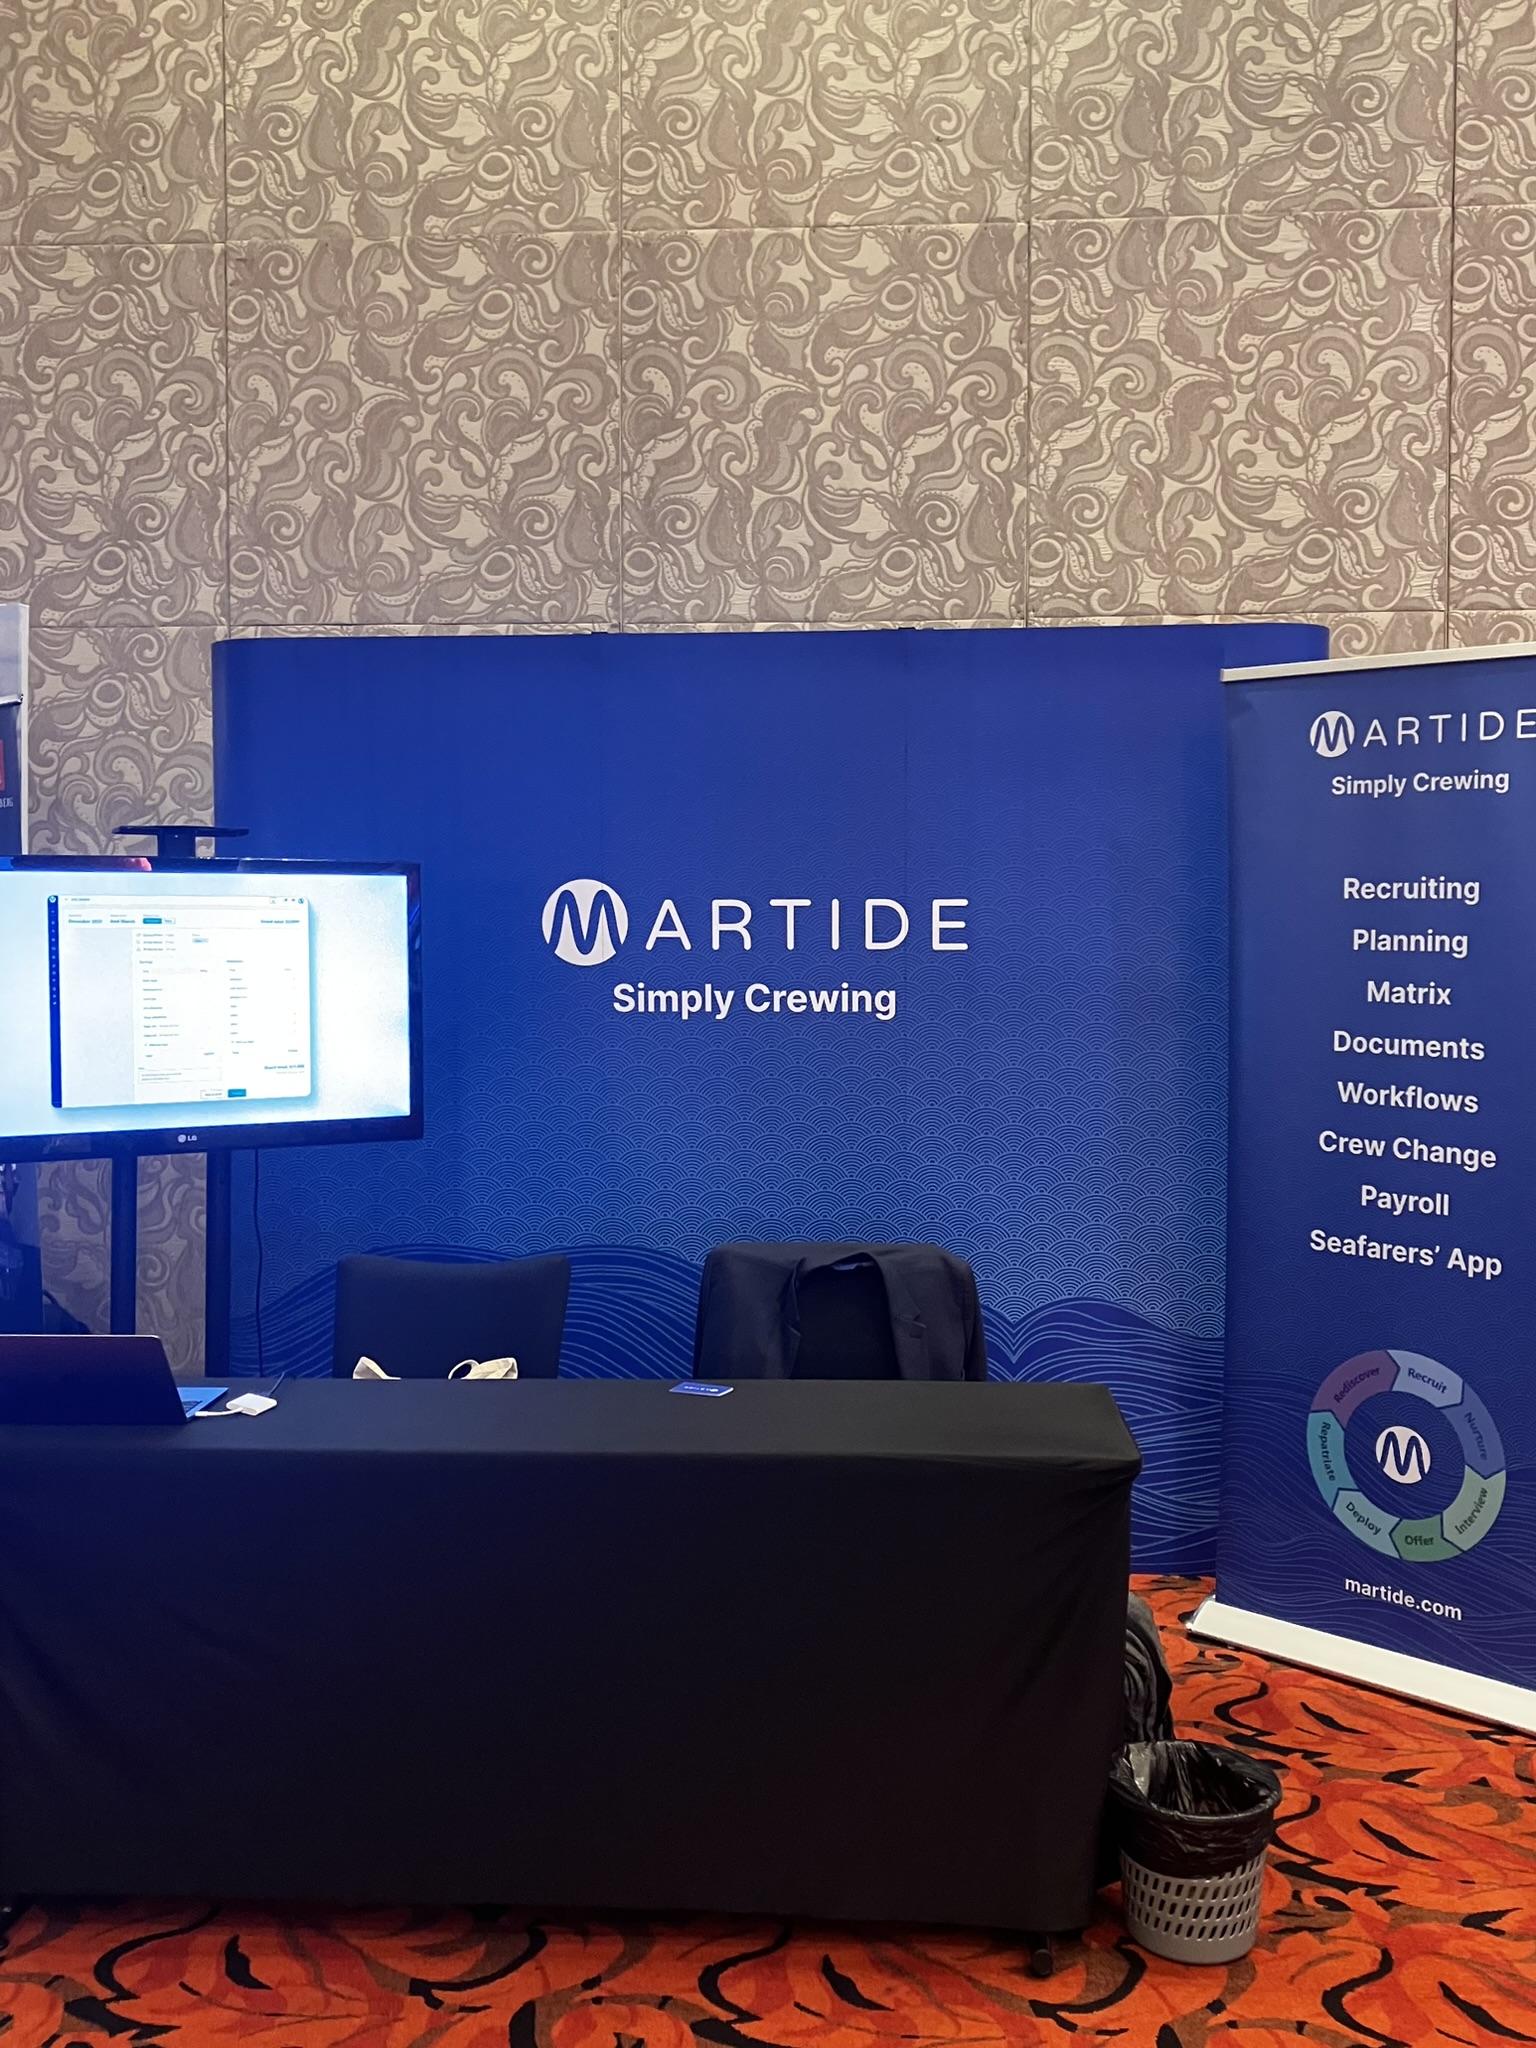 Martide's booth at CrewConnect Global 2023 in Manila